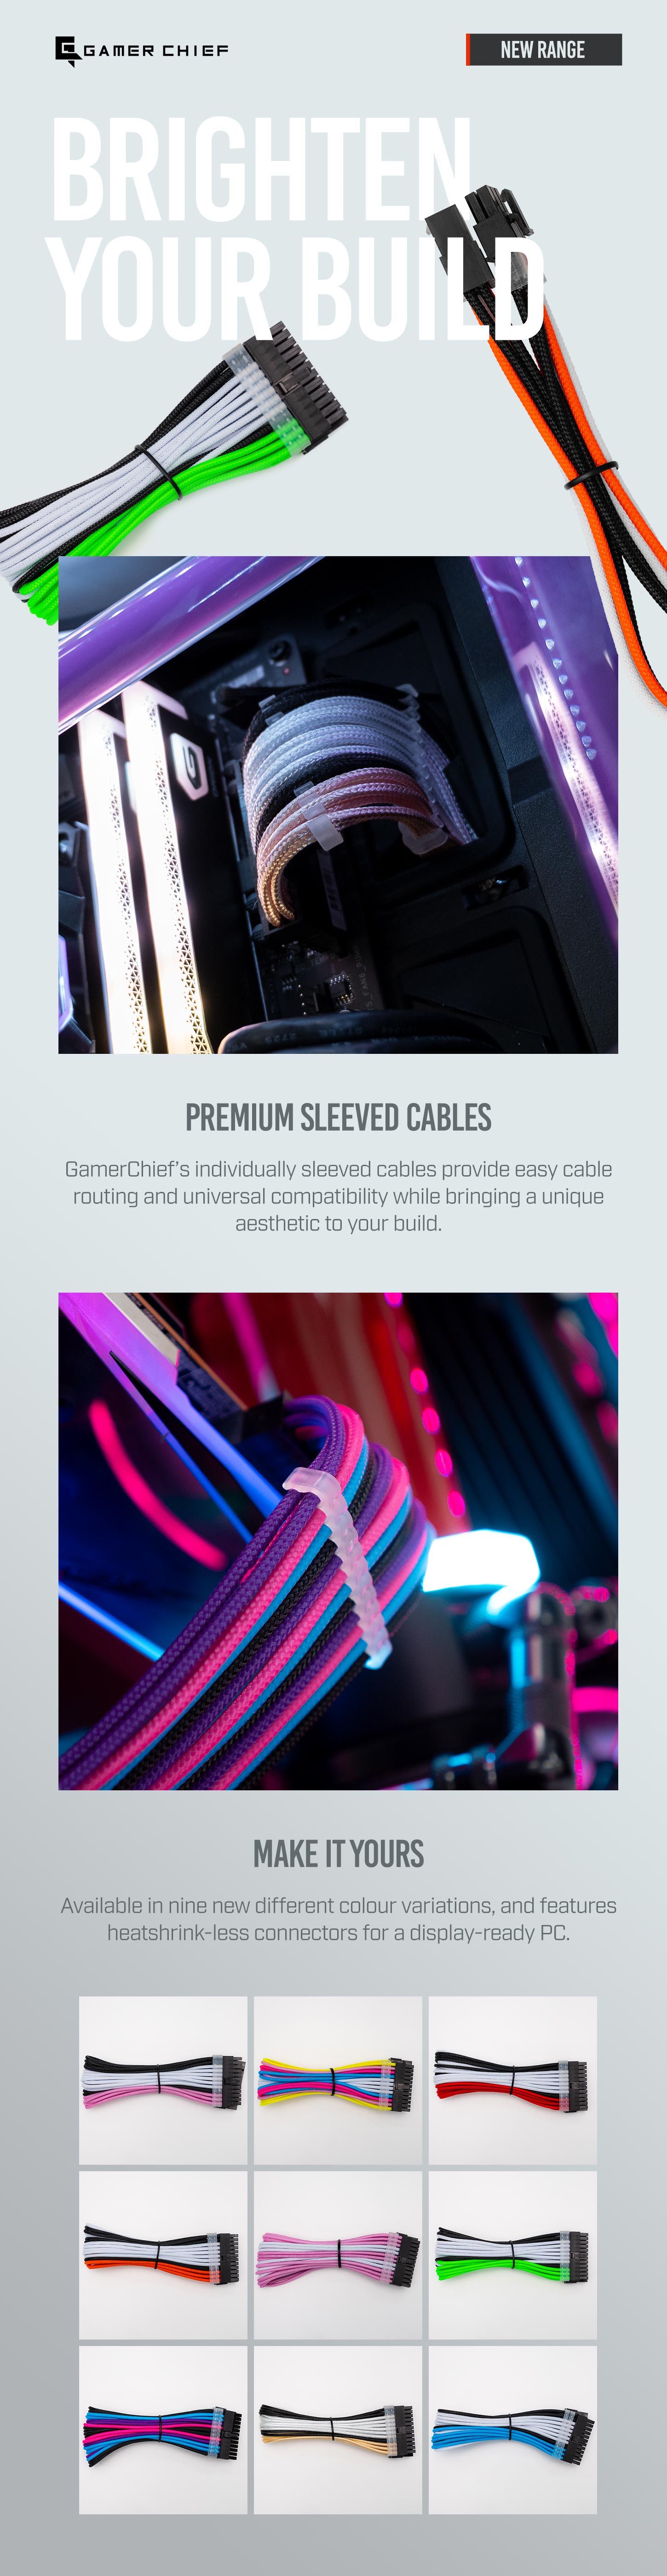 A large marketing image providing additional information about the product GamerChief Elite Series 8-Pin EPS 30cm Sleeved Extension Cable (Red/White/Black) - Additional alt info not provided